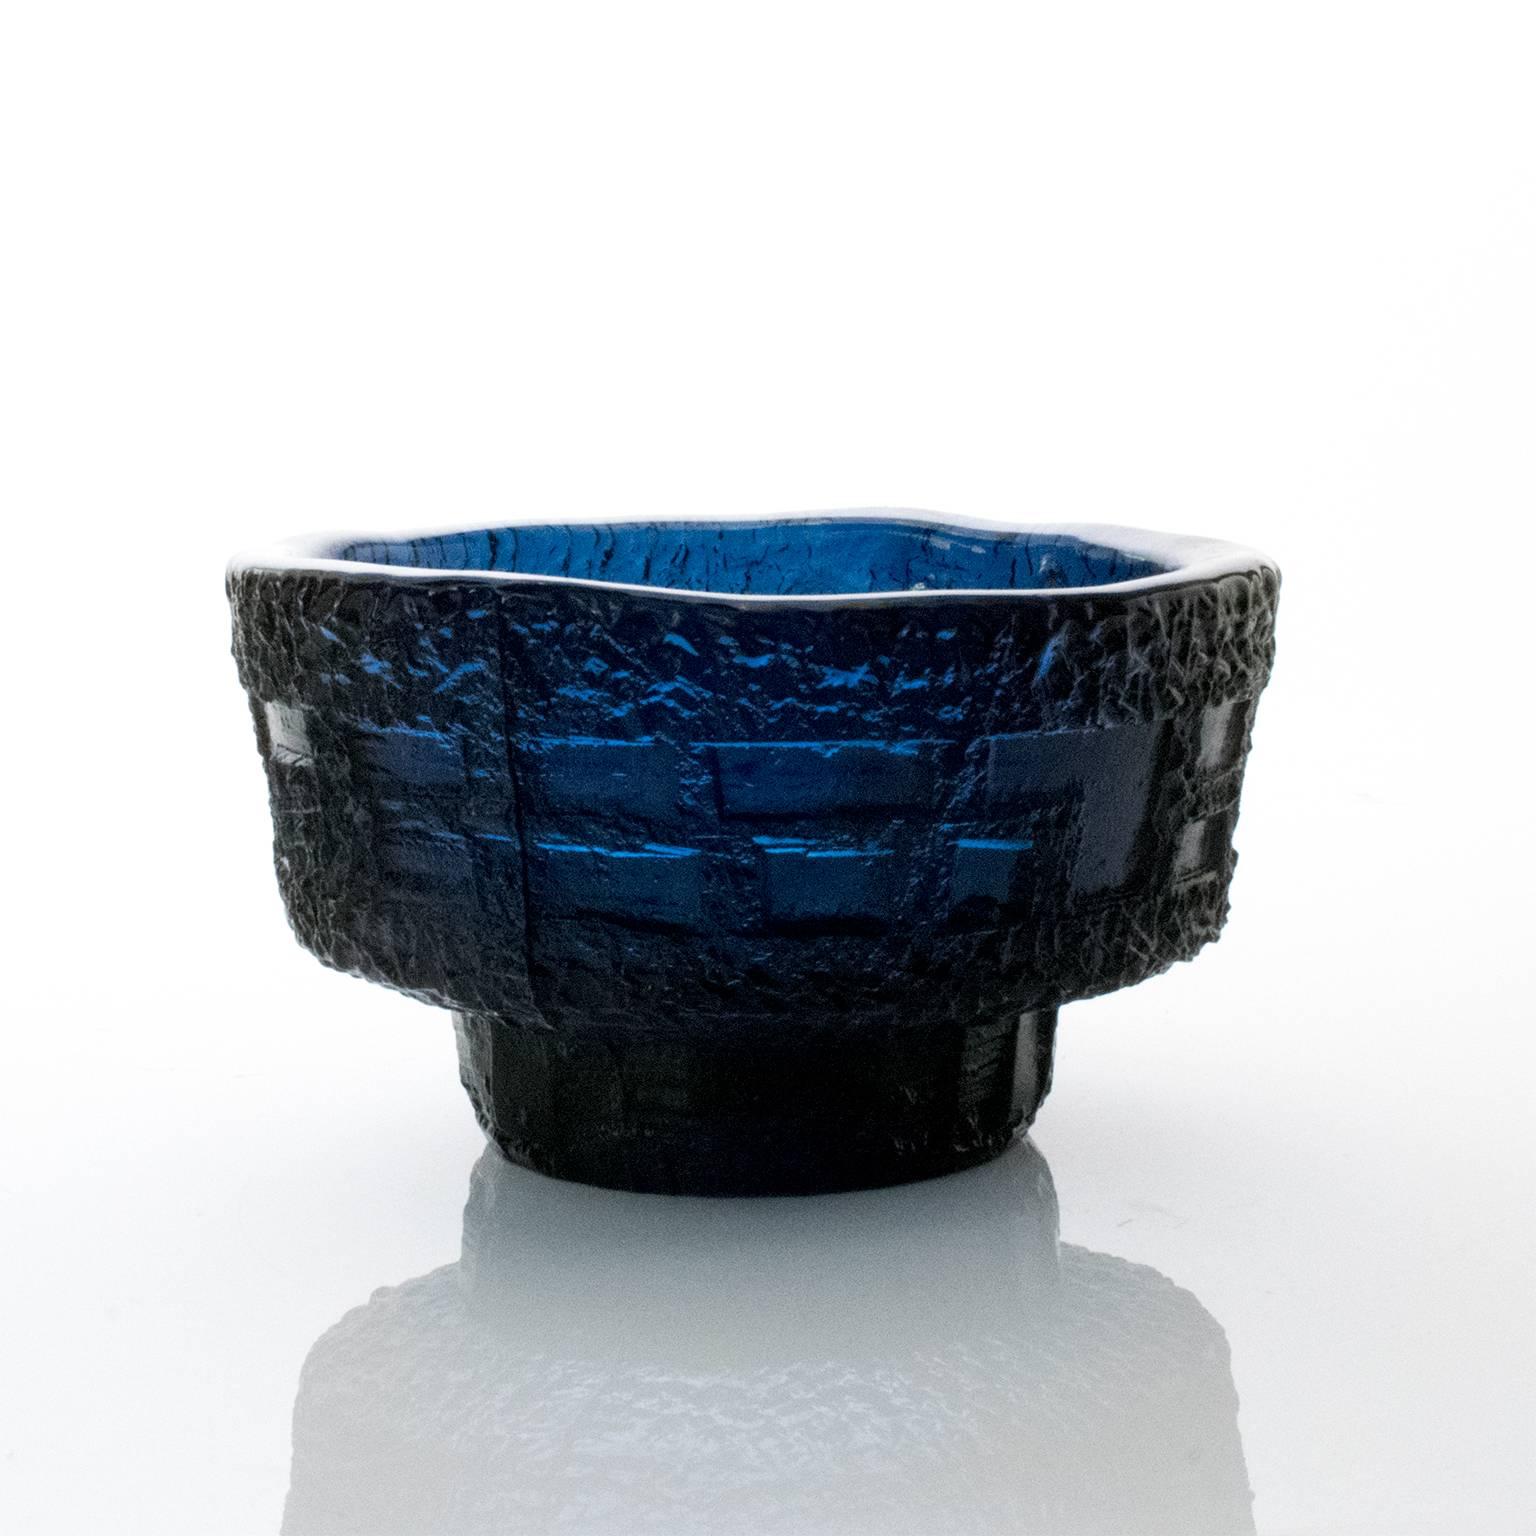 Scandinavian Modern Mid-Century cast deep blue glass bowl by Gote Augustsson for Ruda, circa 1960s.
 
Measures: Height 5